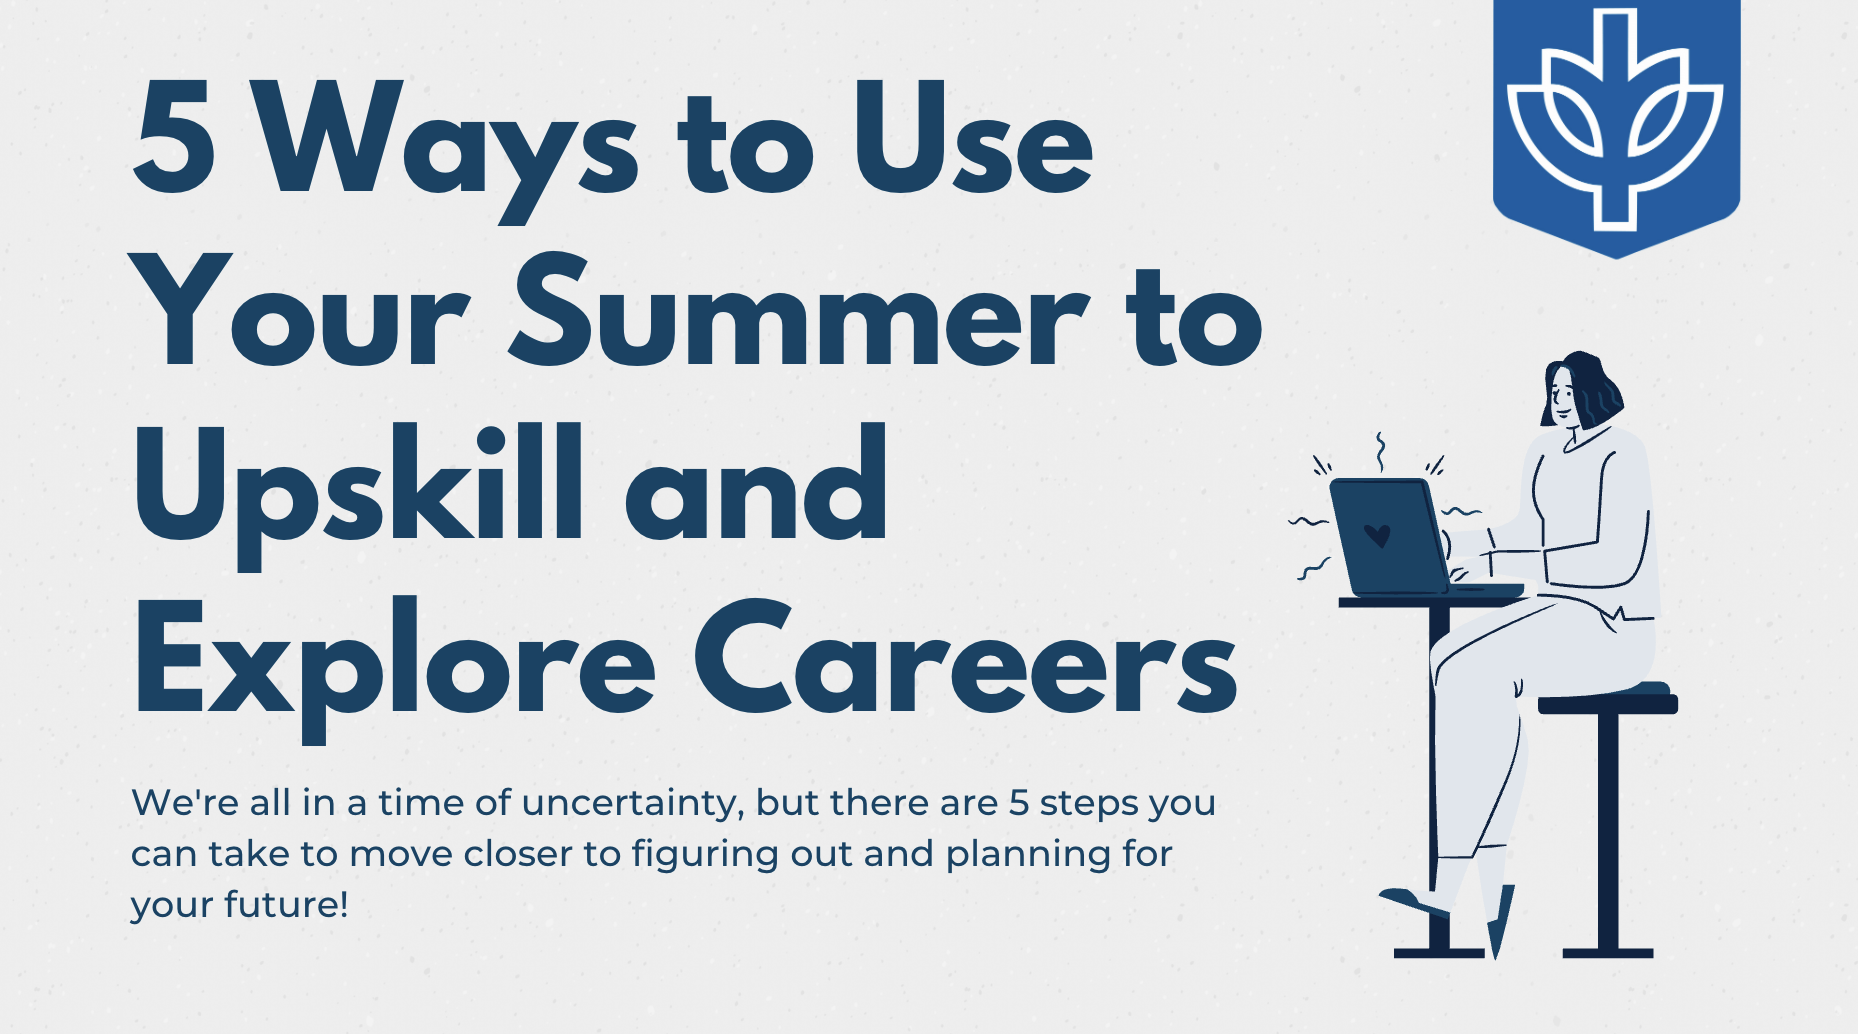 5 Ways to Use Your Summer to Upskill and Explore Careers